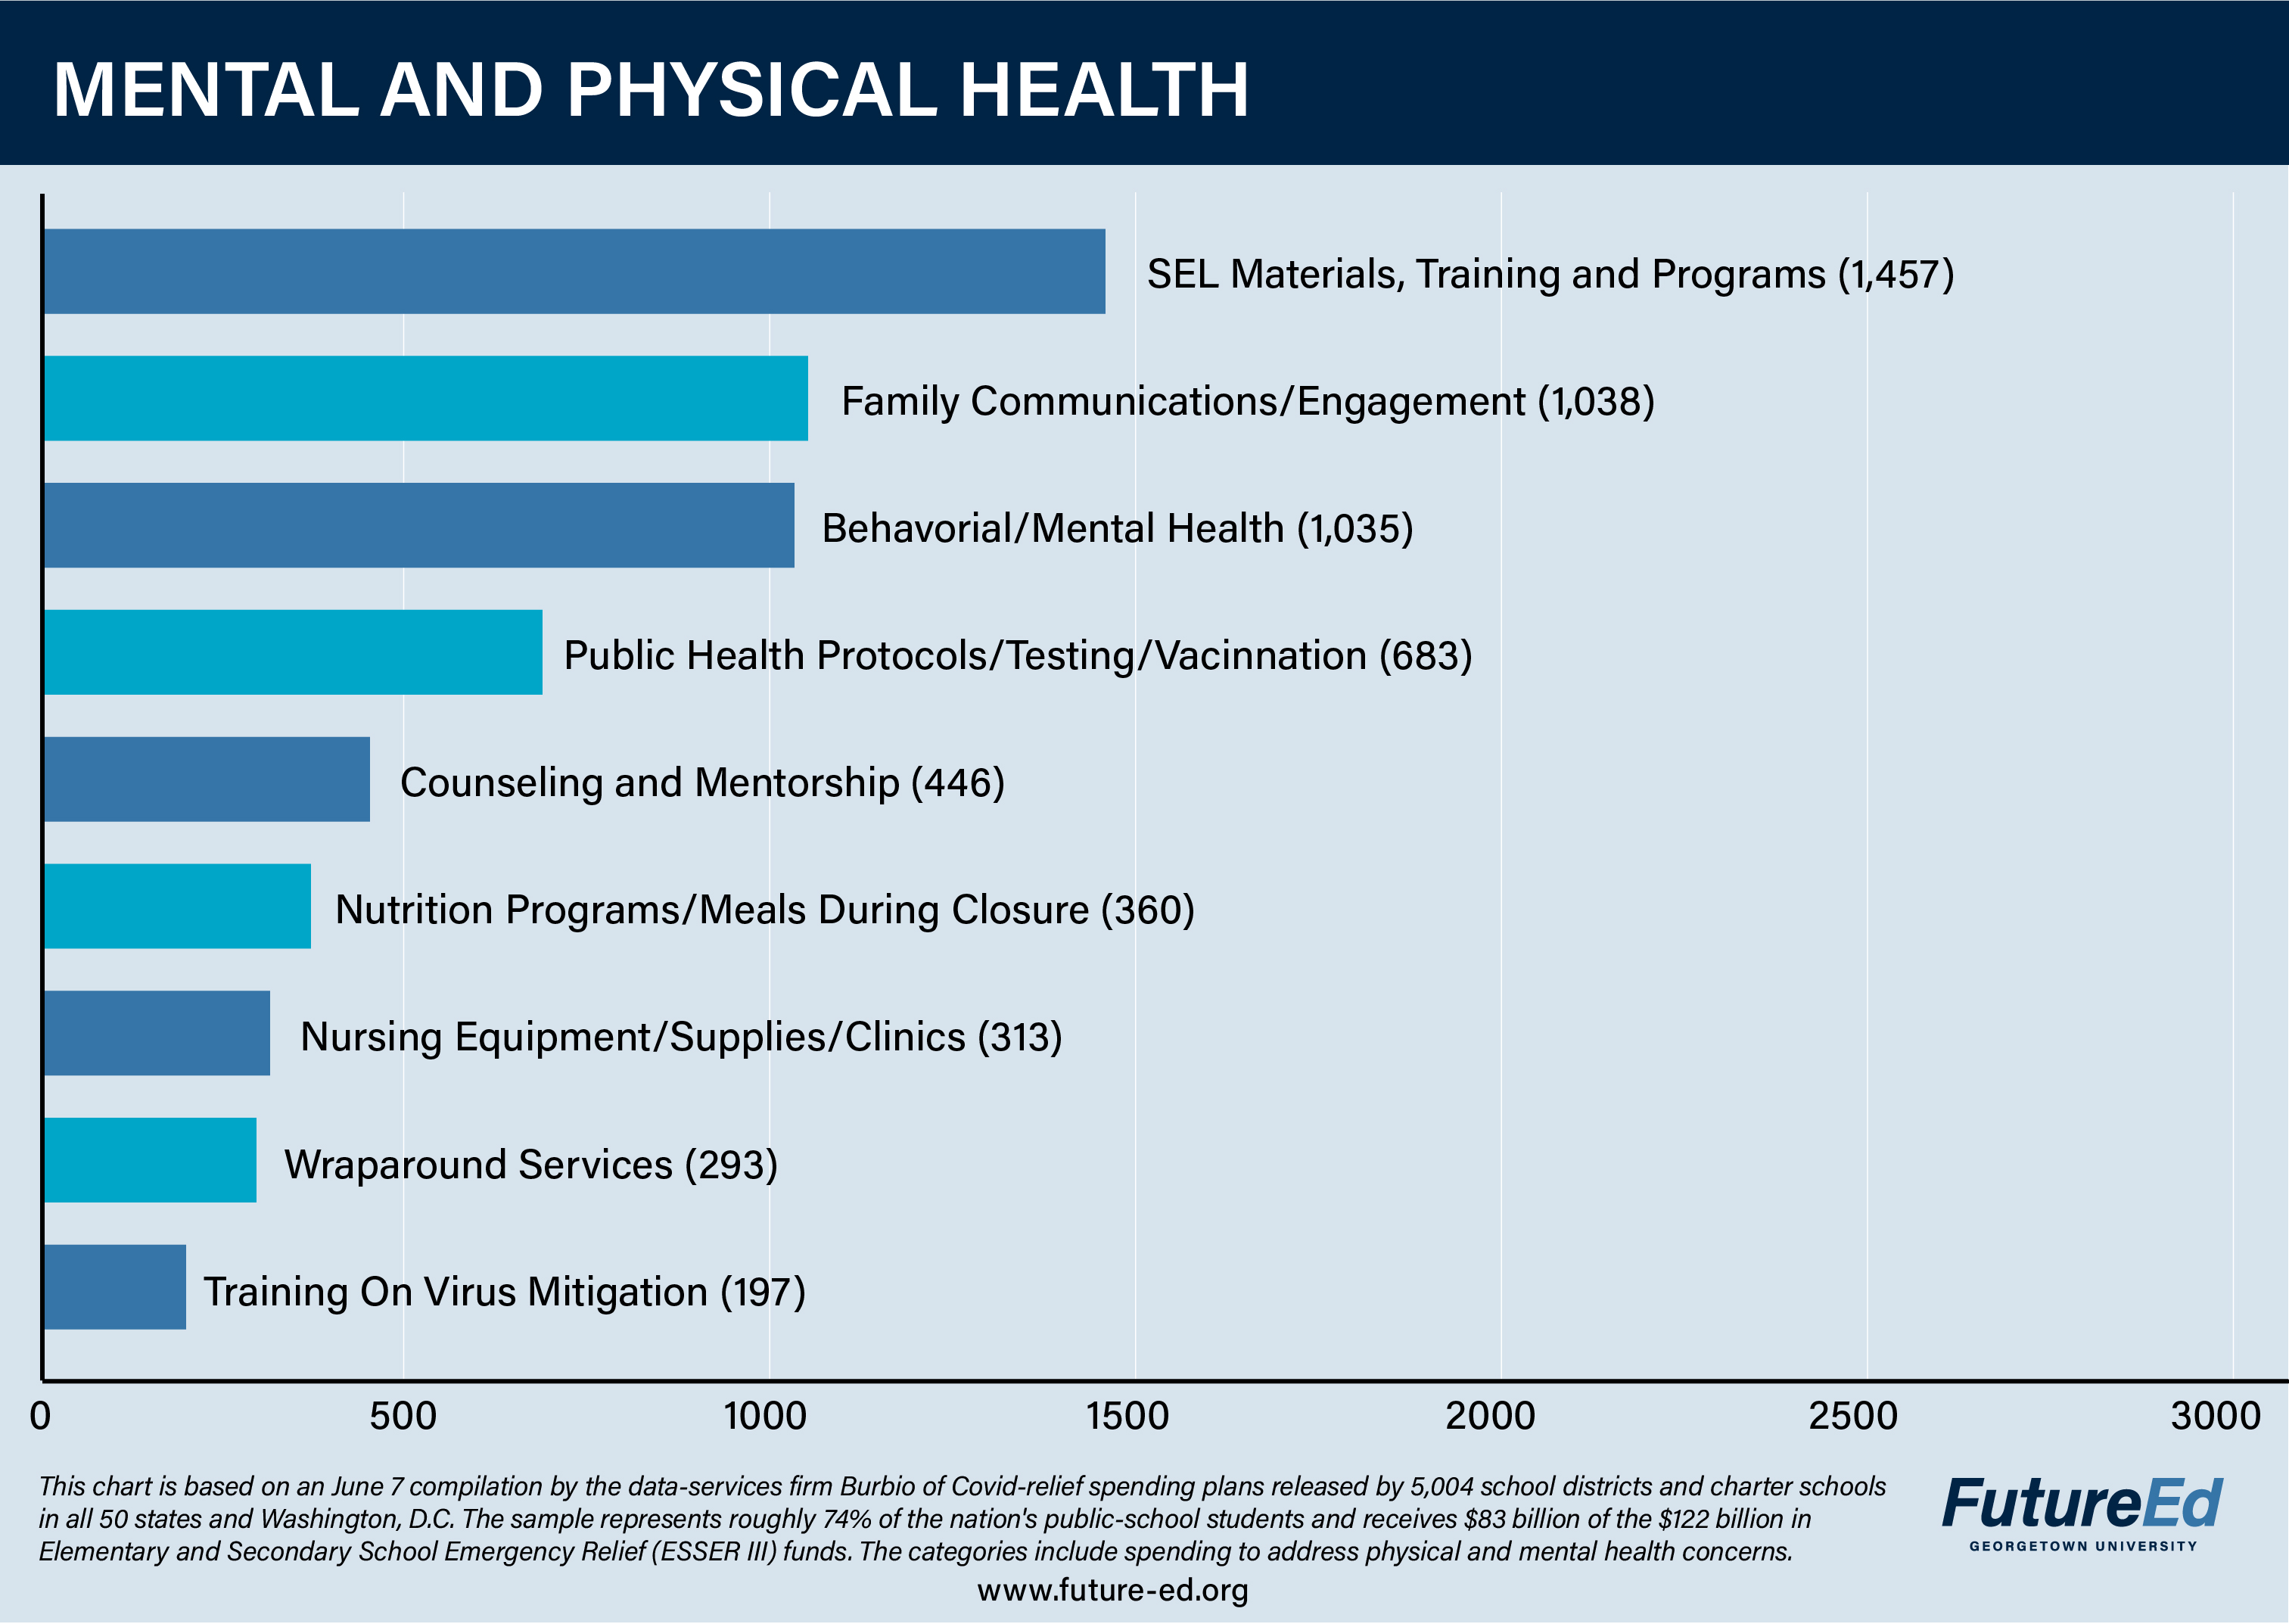 Chart: Mental and Physical Health. SEL materials, training and programs: 1,457. Family communications/engagement: 1,038. Behavioral/mental health: 1,035. Public health protocols/testing/vaccination: 683. Counseling and mentorship: 446. Nutrition programs/meals during closure: 360. Nursing equipment/supplies/clinics: 313. Wraparound services: 293. Training on virus mitigation: 197. (This chart is based on a June 7 compilation by the data-services firm Burbio of Covid-relief spending plans released by 5,004 school districts and charter schools in all 50 states and Washington, D.C. The sample represents roughly 74% of the nation's public-school students and receives $83 billion of the $122 billion in Elementary and Secondary School Emergency Relief (ESSER III) funds. The categories include spending to address physical and mental health concerns.) Links to school climate and student health page.